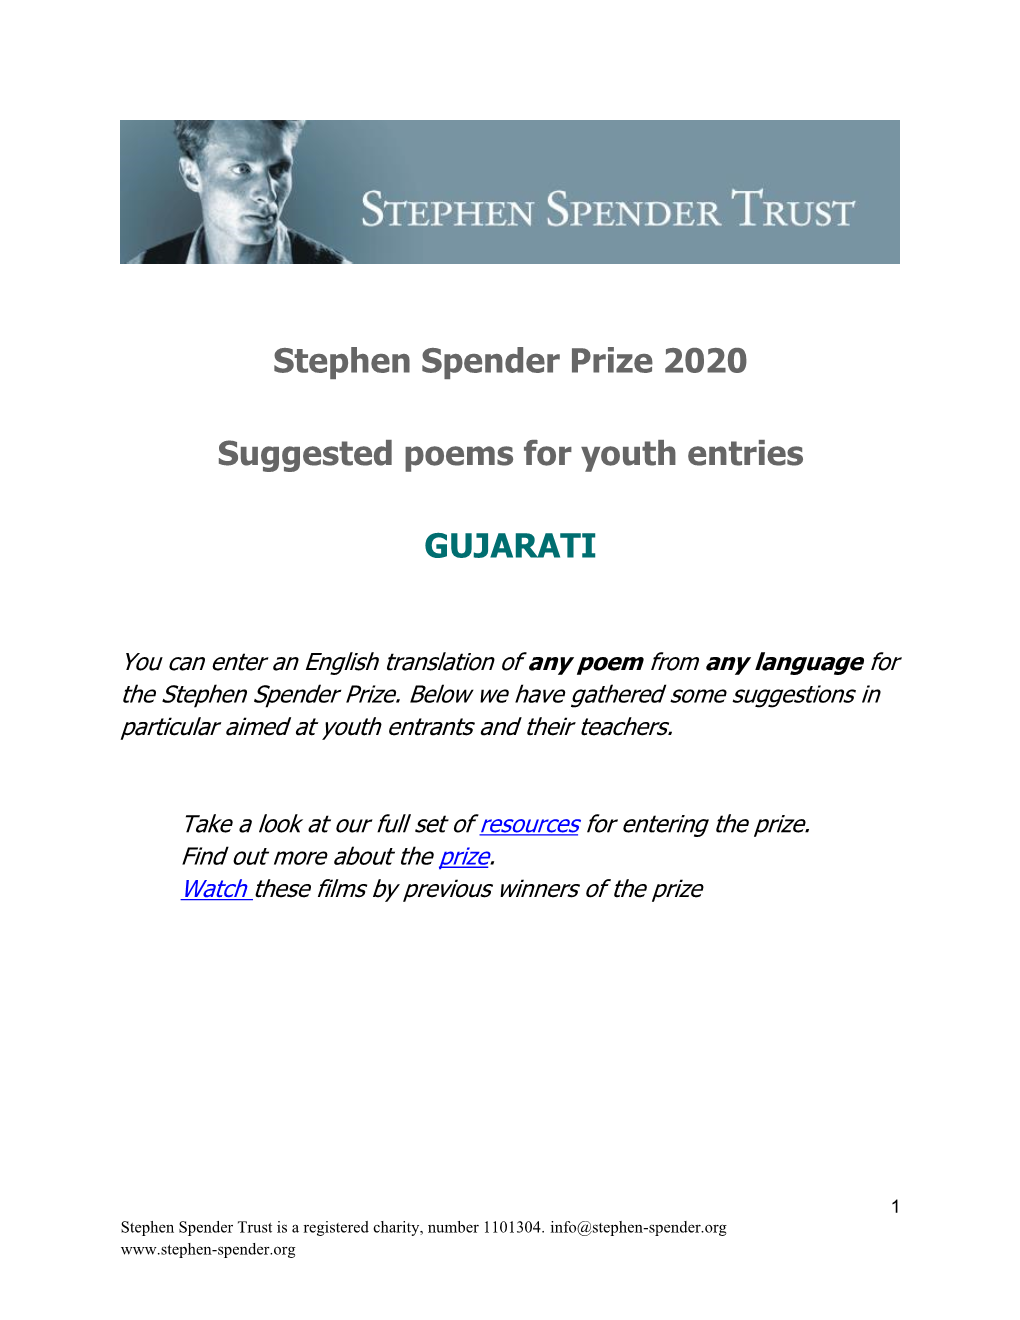 Stephen Spender Prize 2020 Suggested Poems for Youth Entries